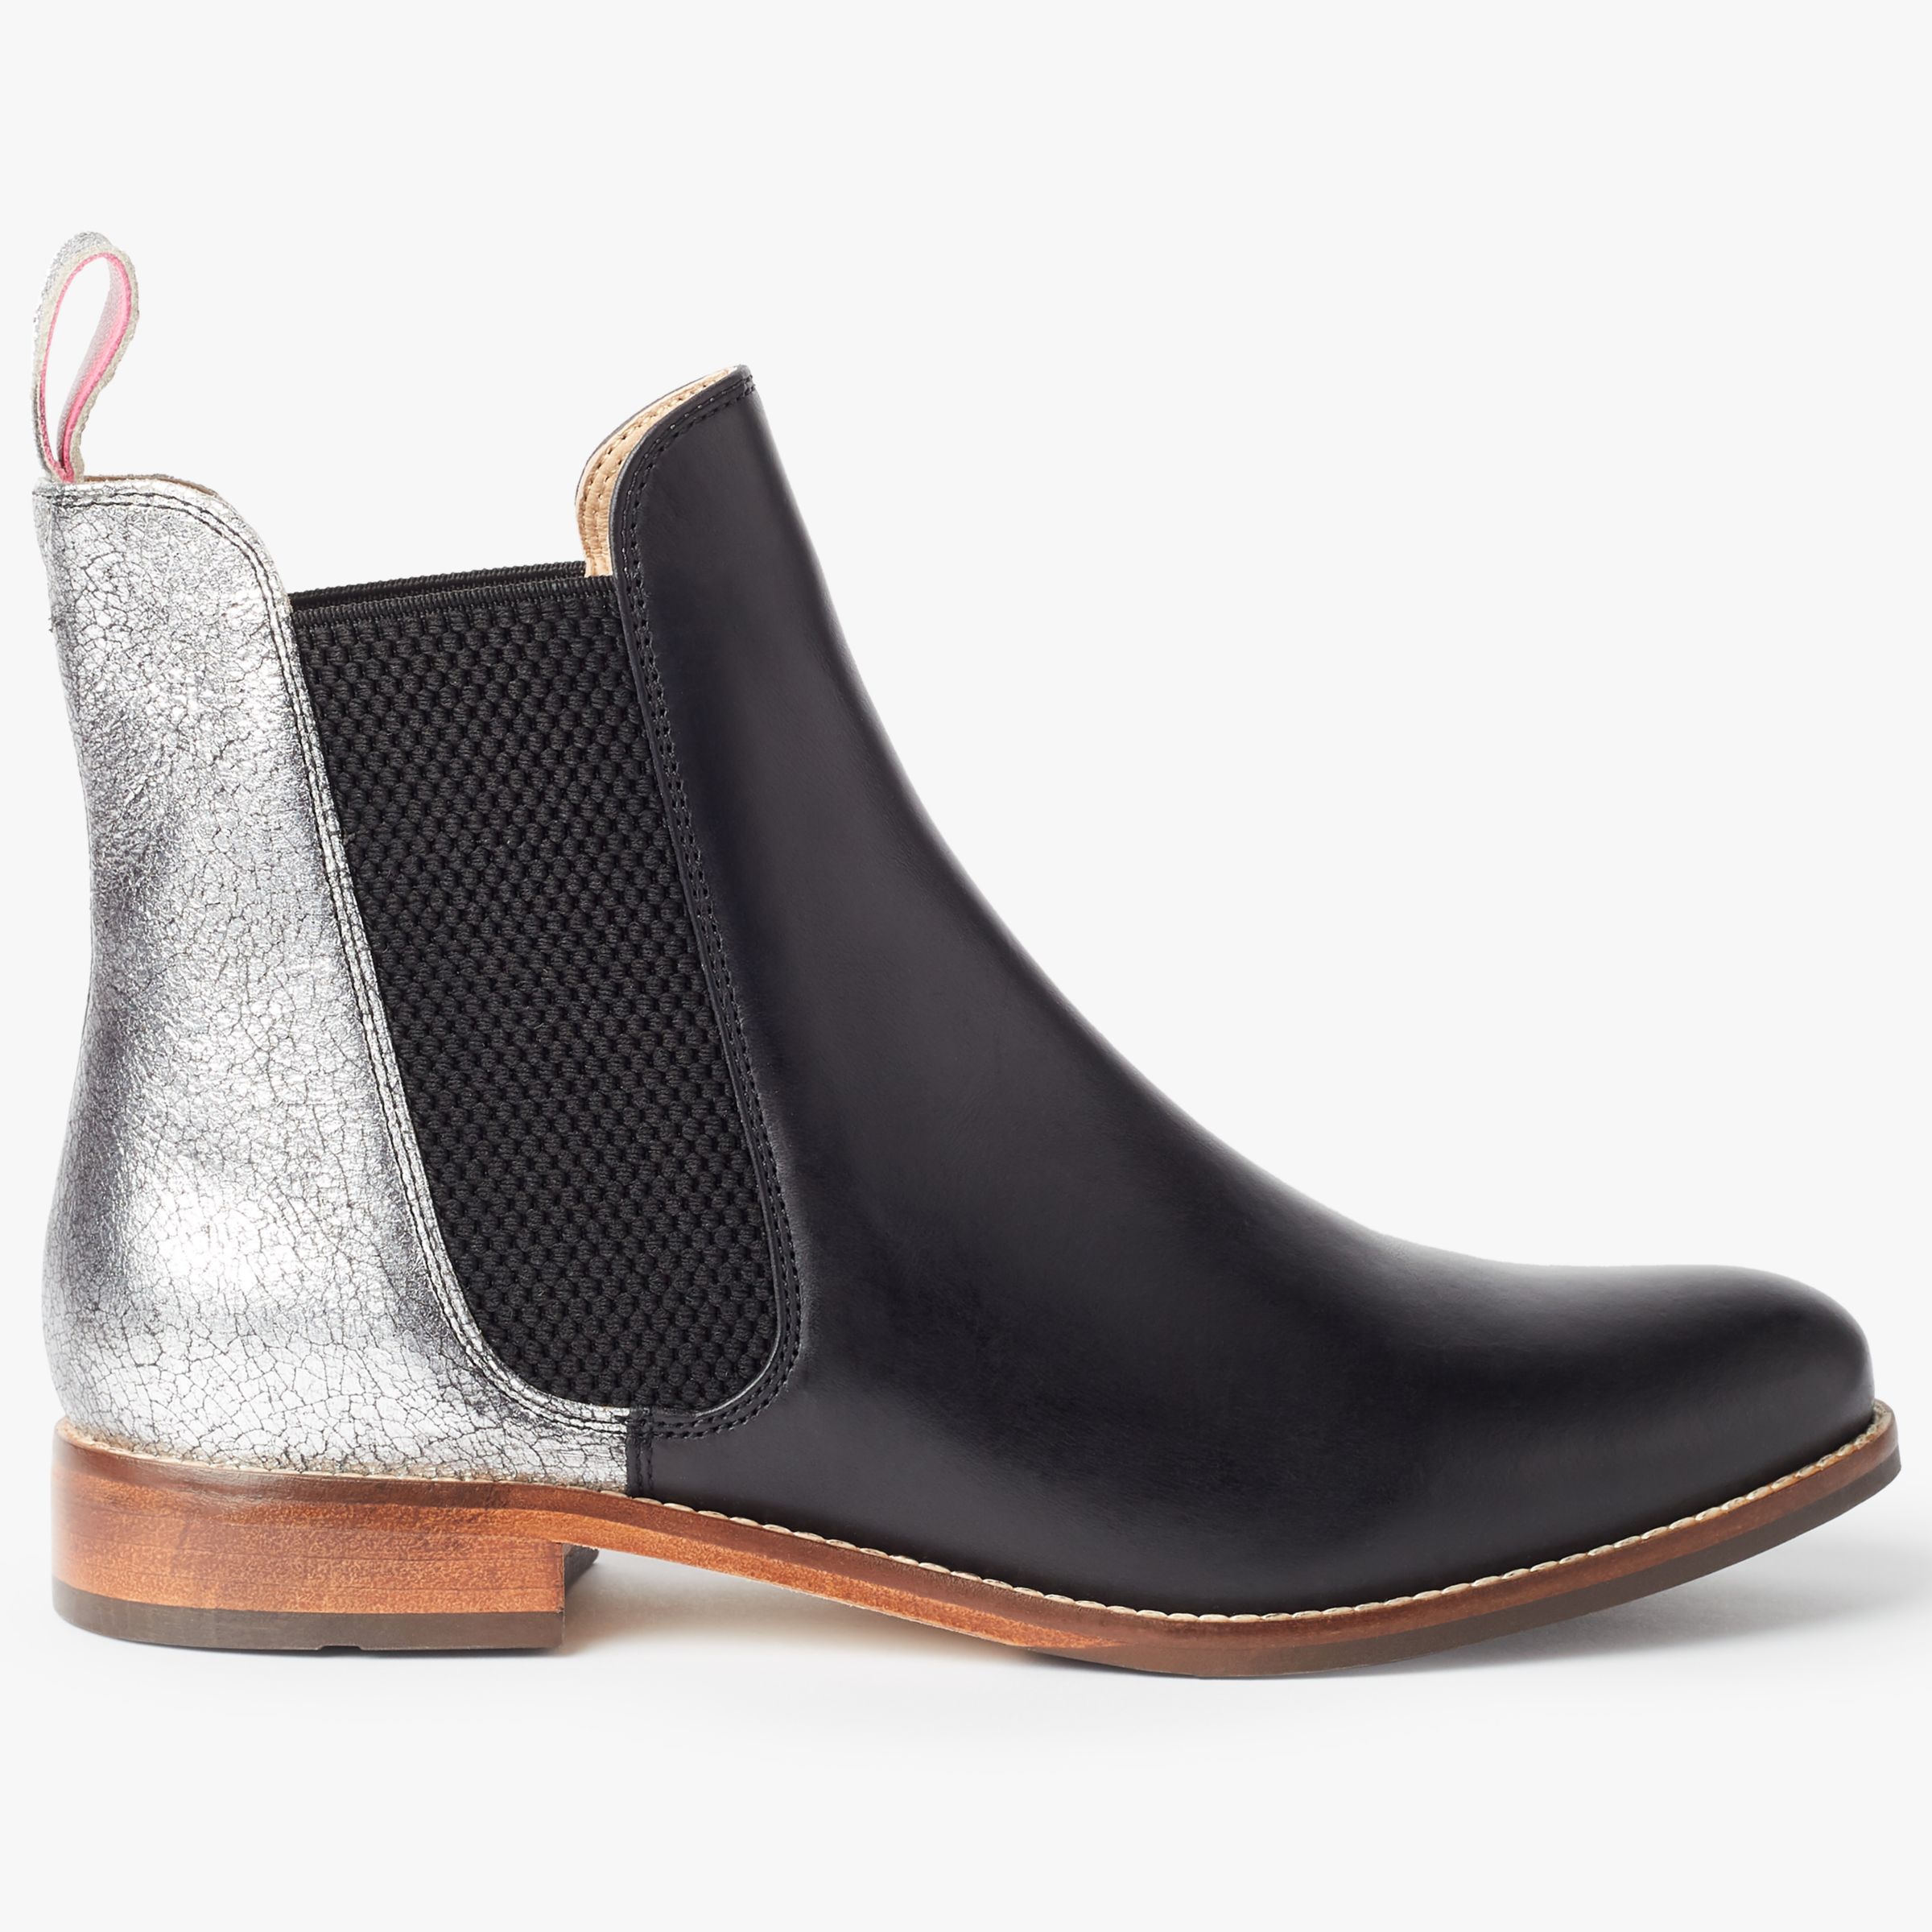 Joules Westbourne Leather Chelsea Boots,